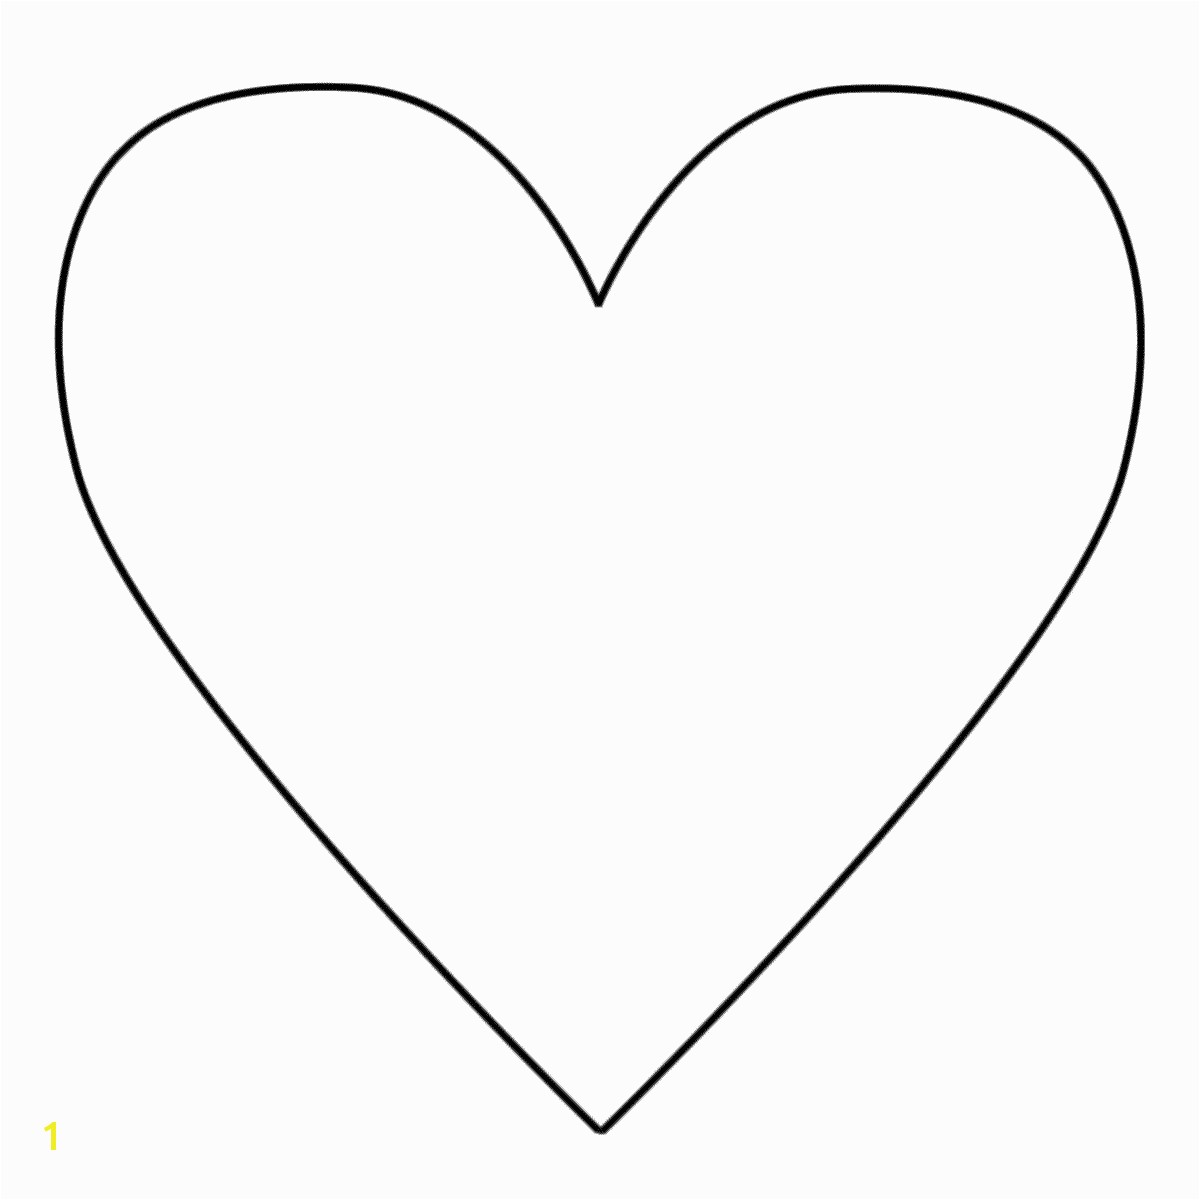 35 good heart template for cutouts for heart animals